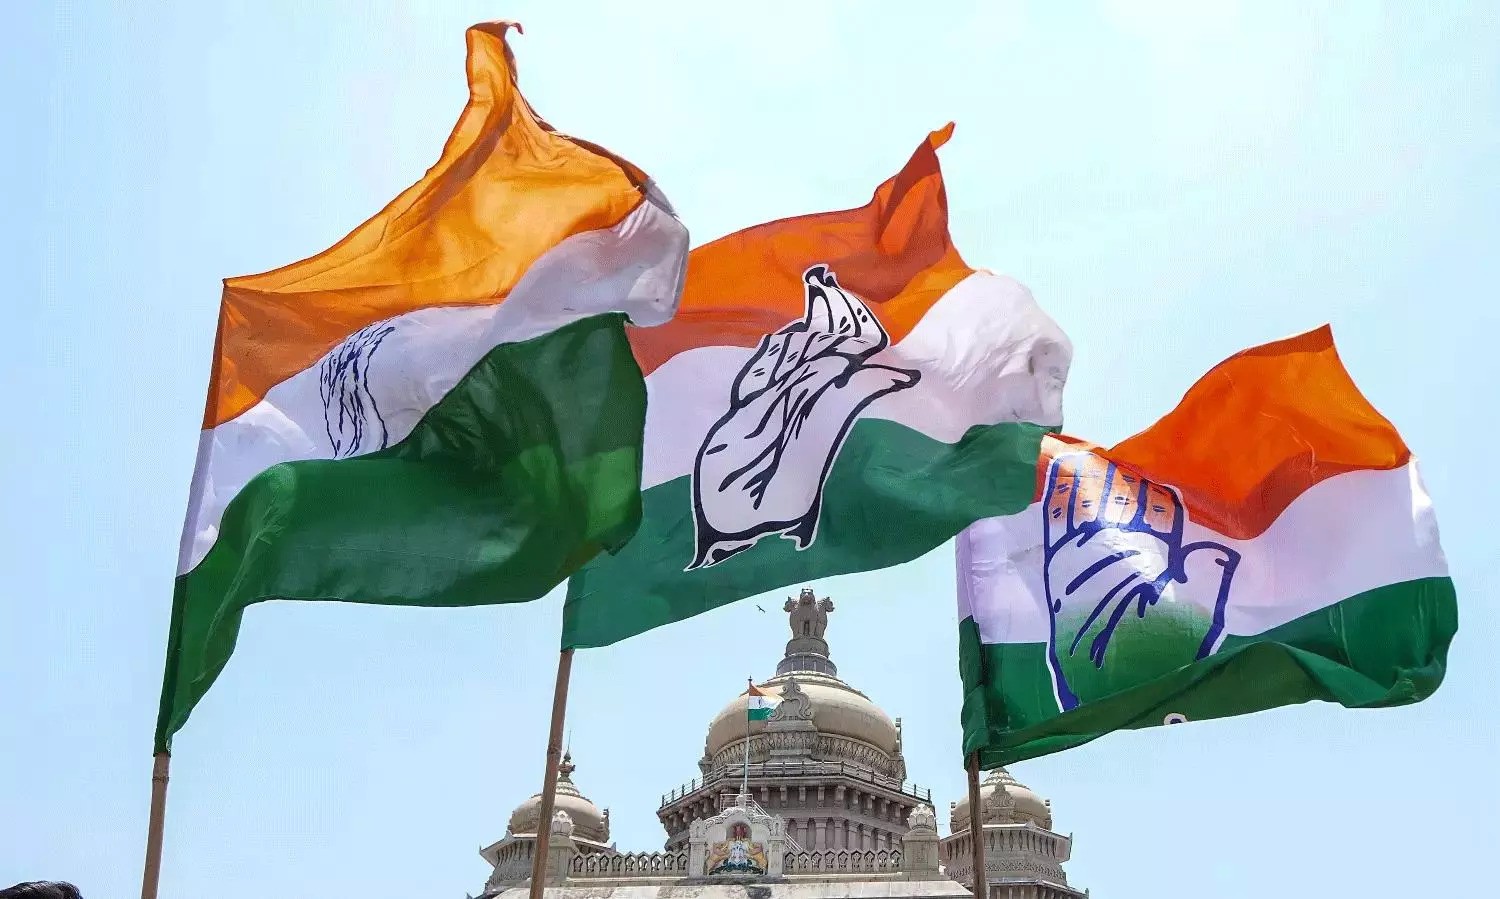 Congress Party in India Says Competition Important for Retail, Media, Ports